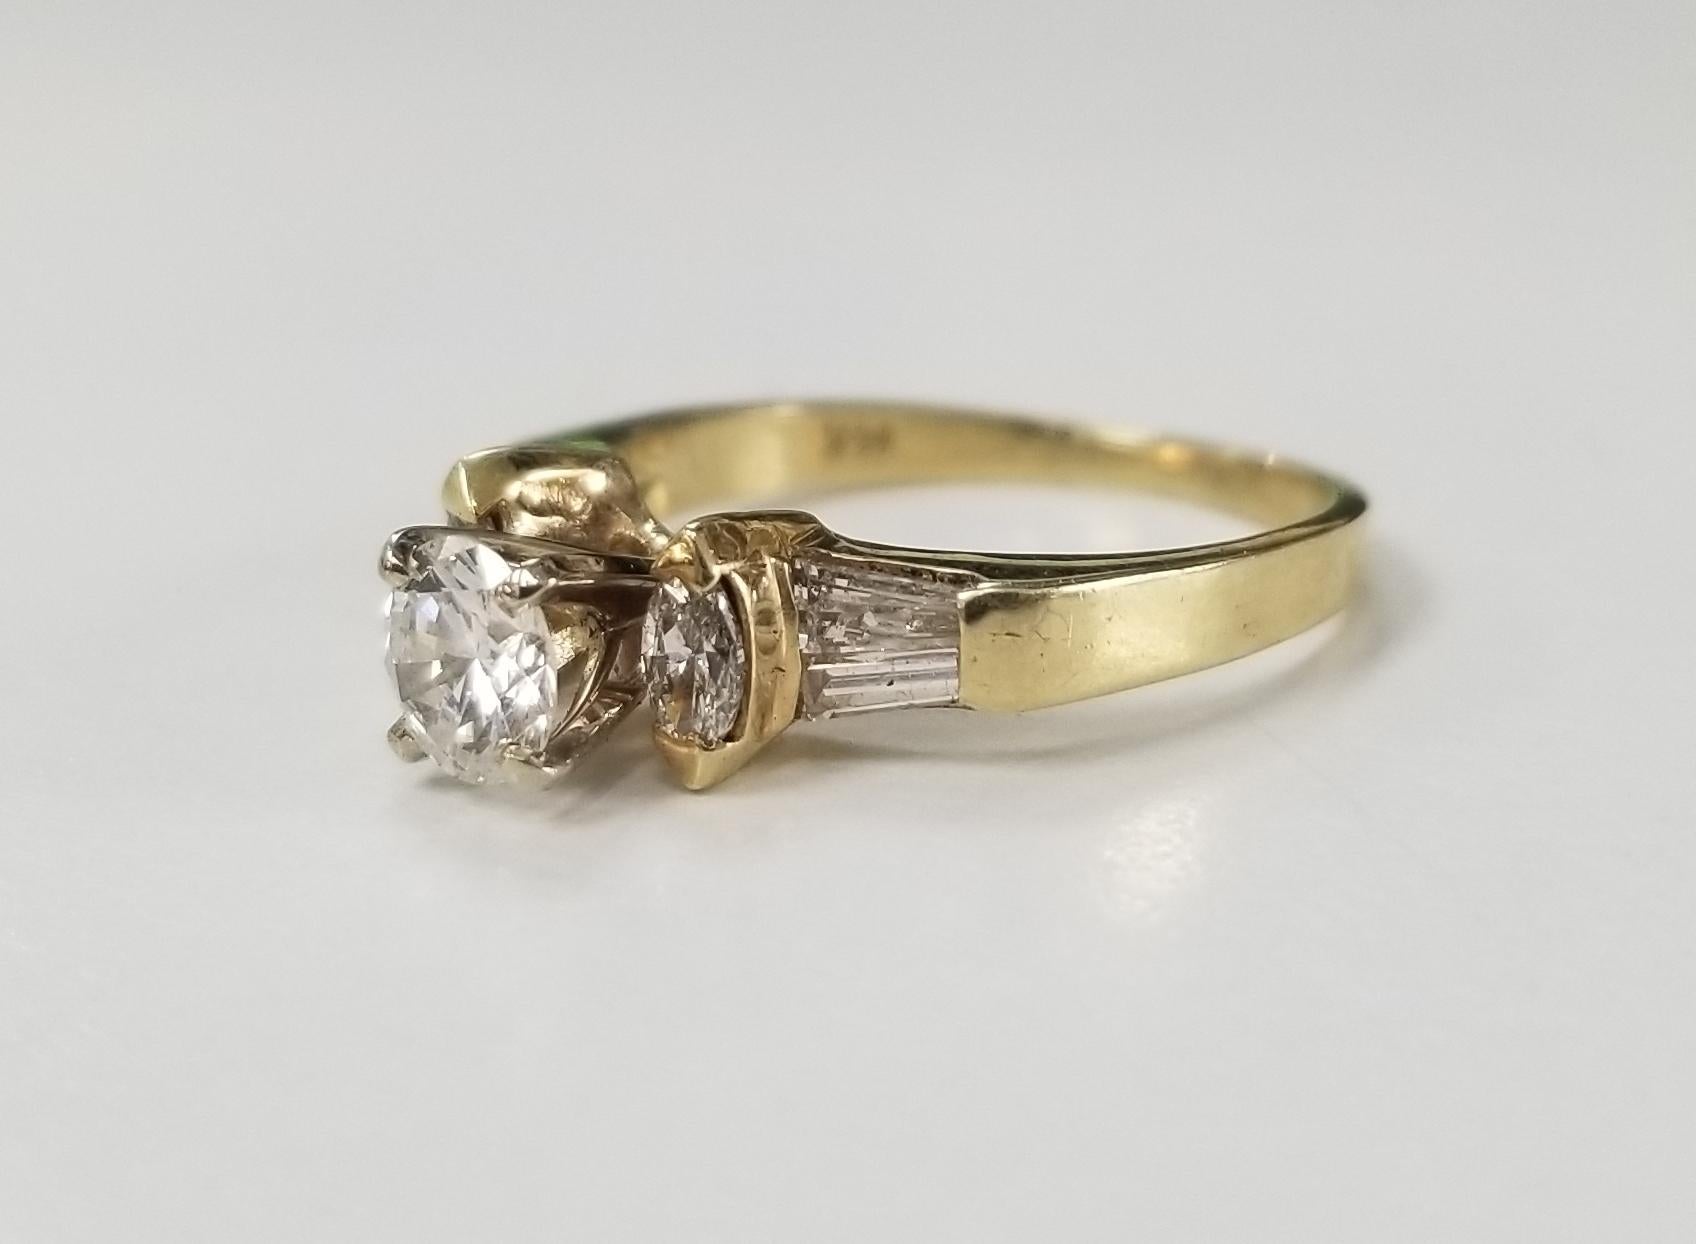 14k yellow gold diamond engagement ring, containing 1 brilliant cut diamond; color G, clarity VS and weight .35pts. and 2 marquise cut diamonds and 4 baguette cut diamonds of very fine quality weighing .25pts. ring is a size 4.5 and can be sized to